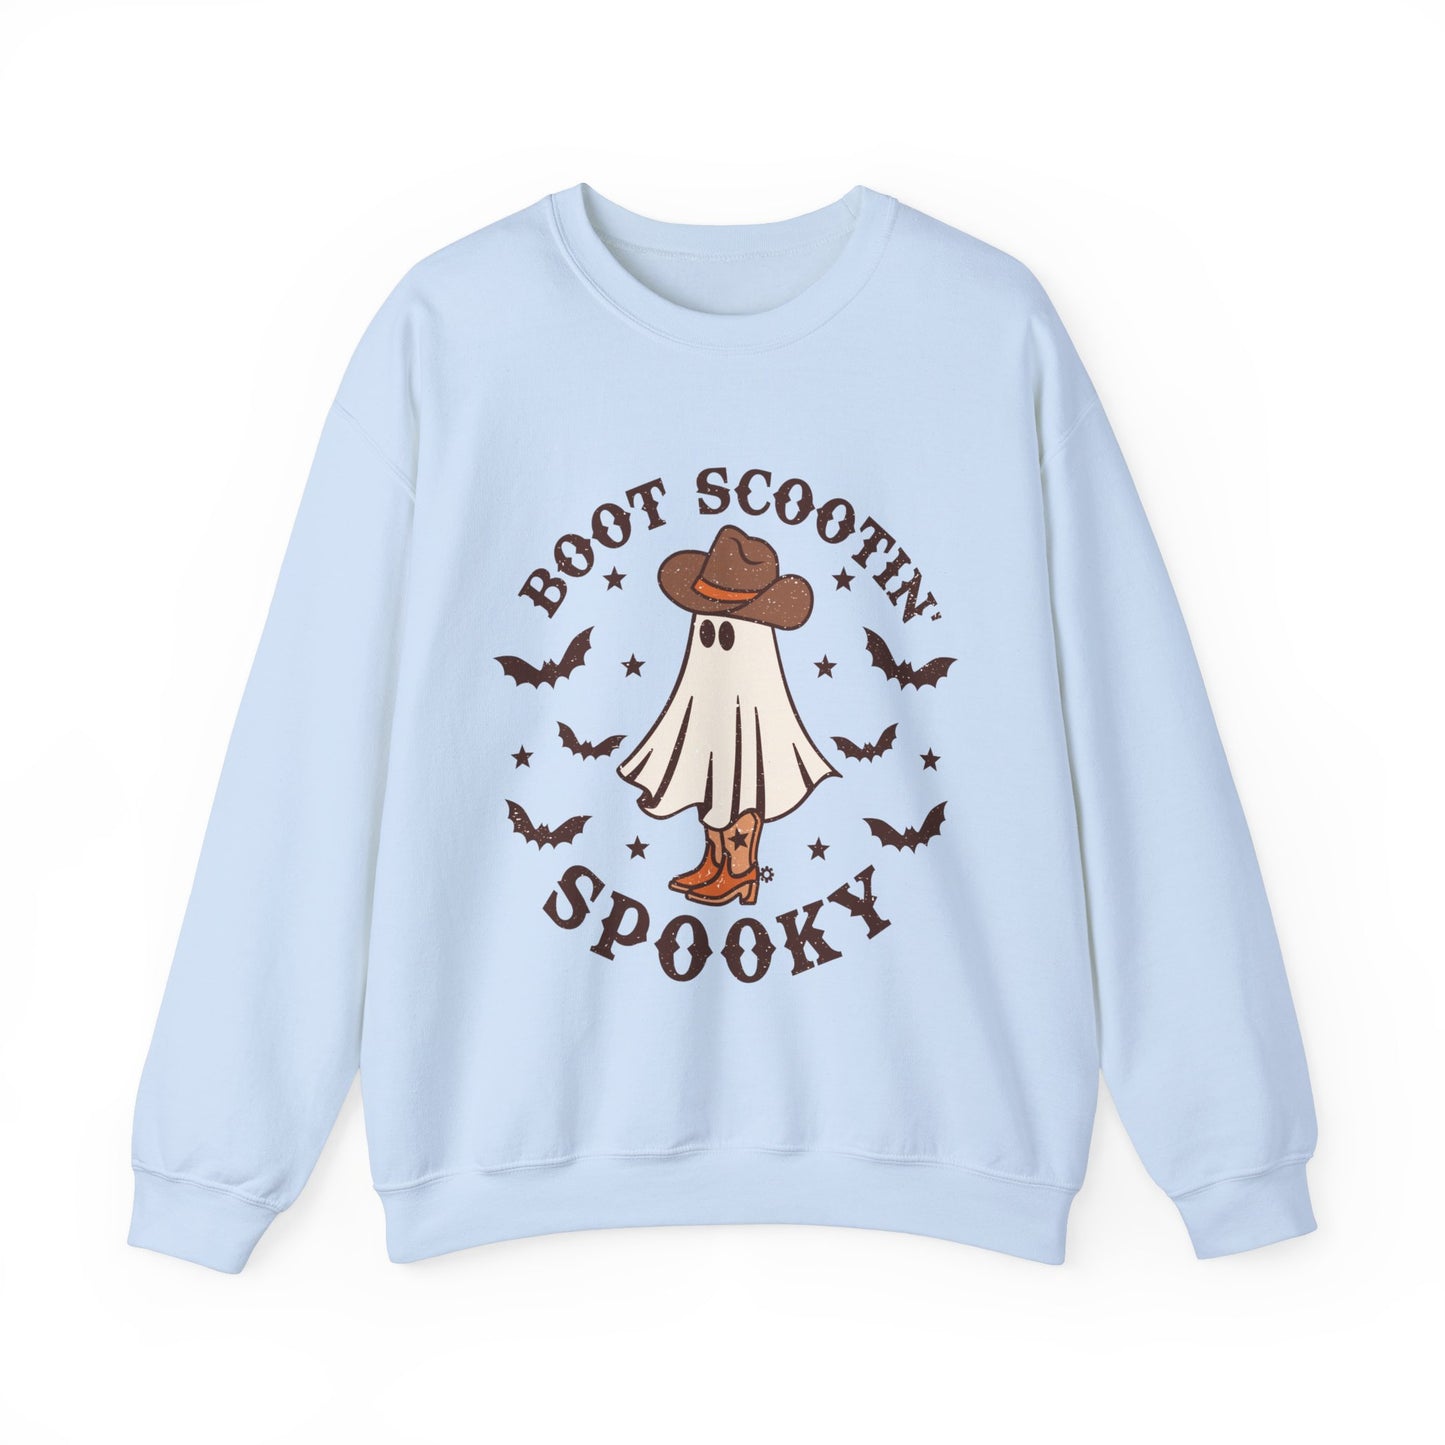 Cute Spooky Retro Halloween Sweatshirt, Scootin Boots Western shirt for Halloween, Vintage Western Cowboy Ghost Design, Holiday Gift for Her